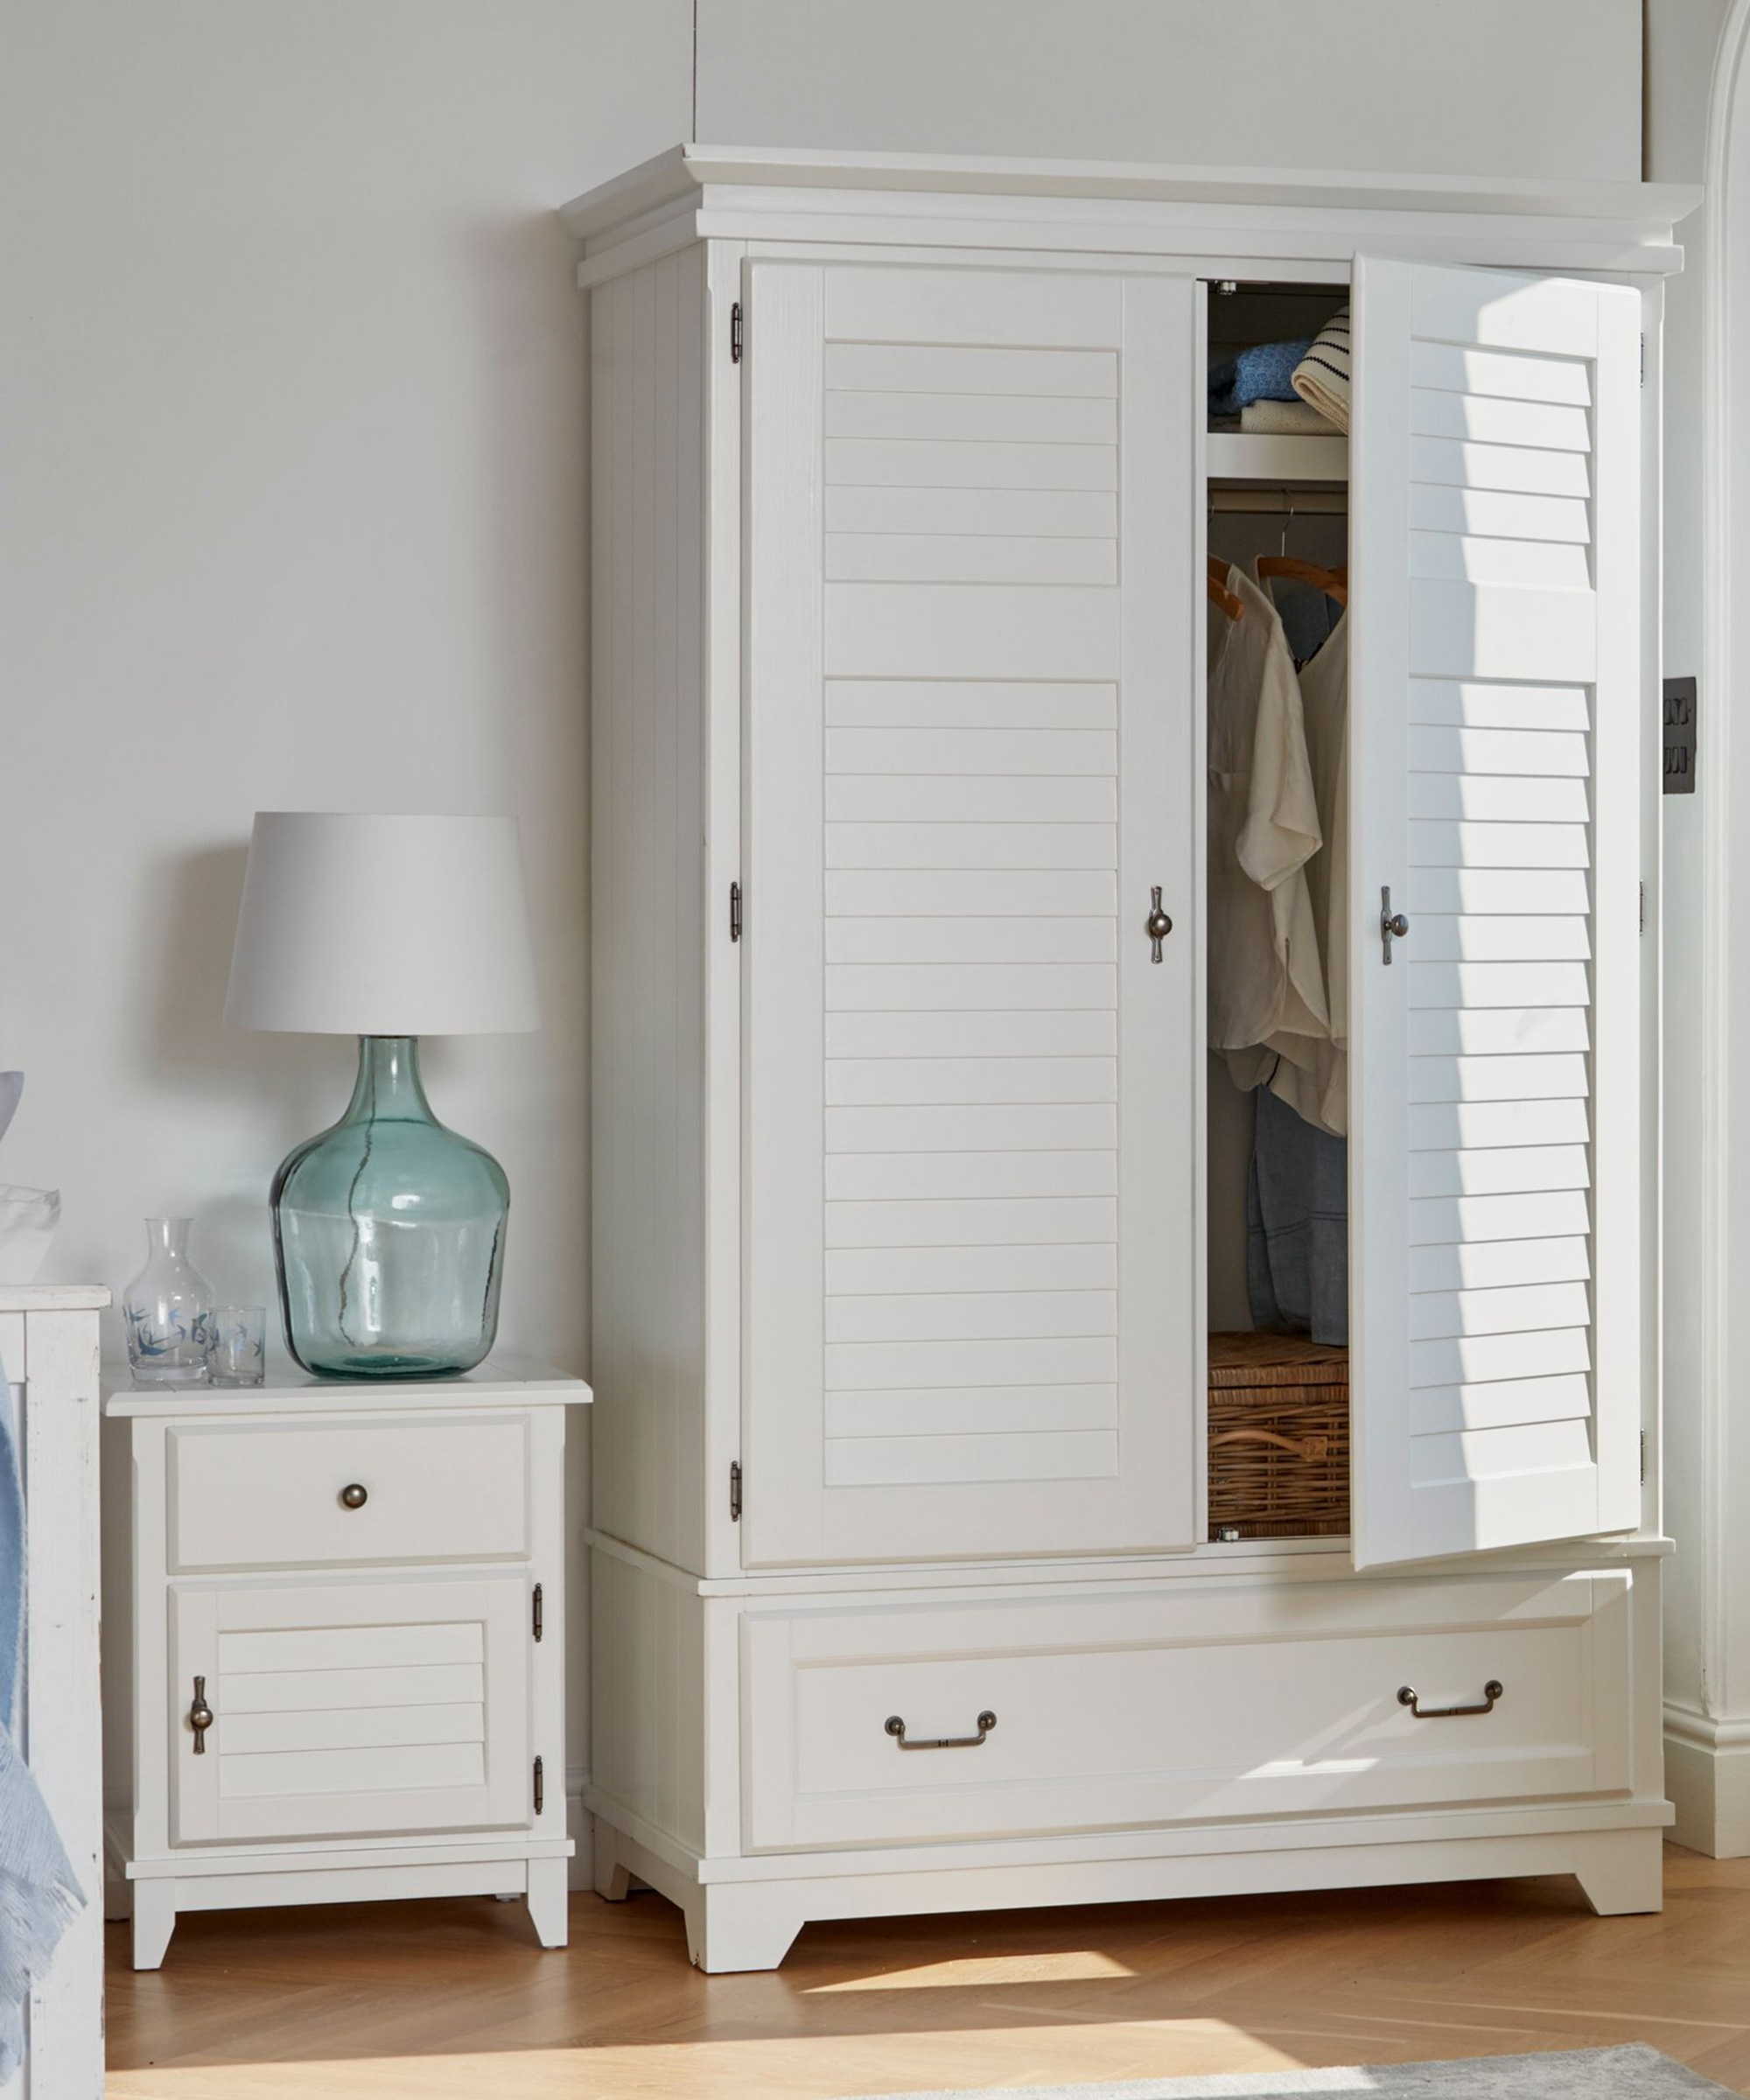 A white wardrobe with louvered doors and accompanying side board by Laura Ashley